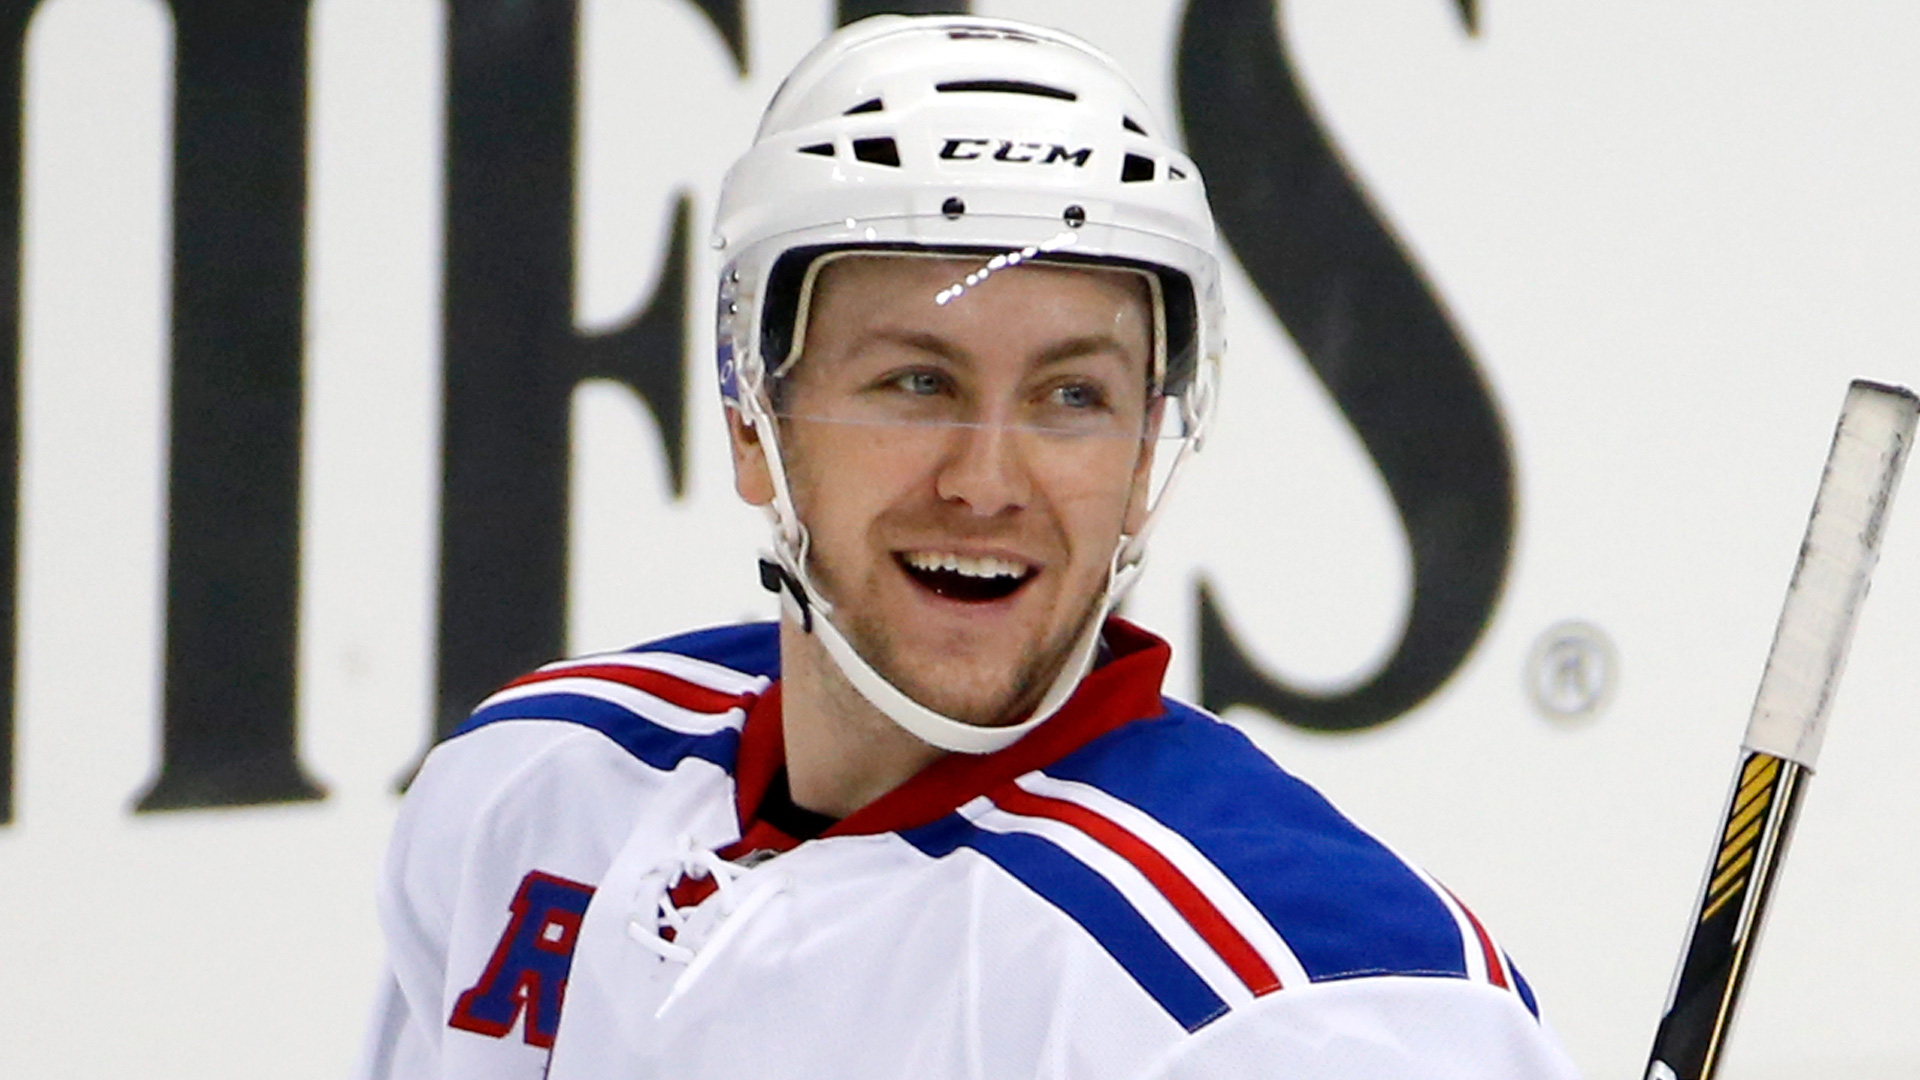 Stepan: Vesey Made Plays at a Really High Level